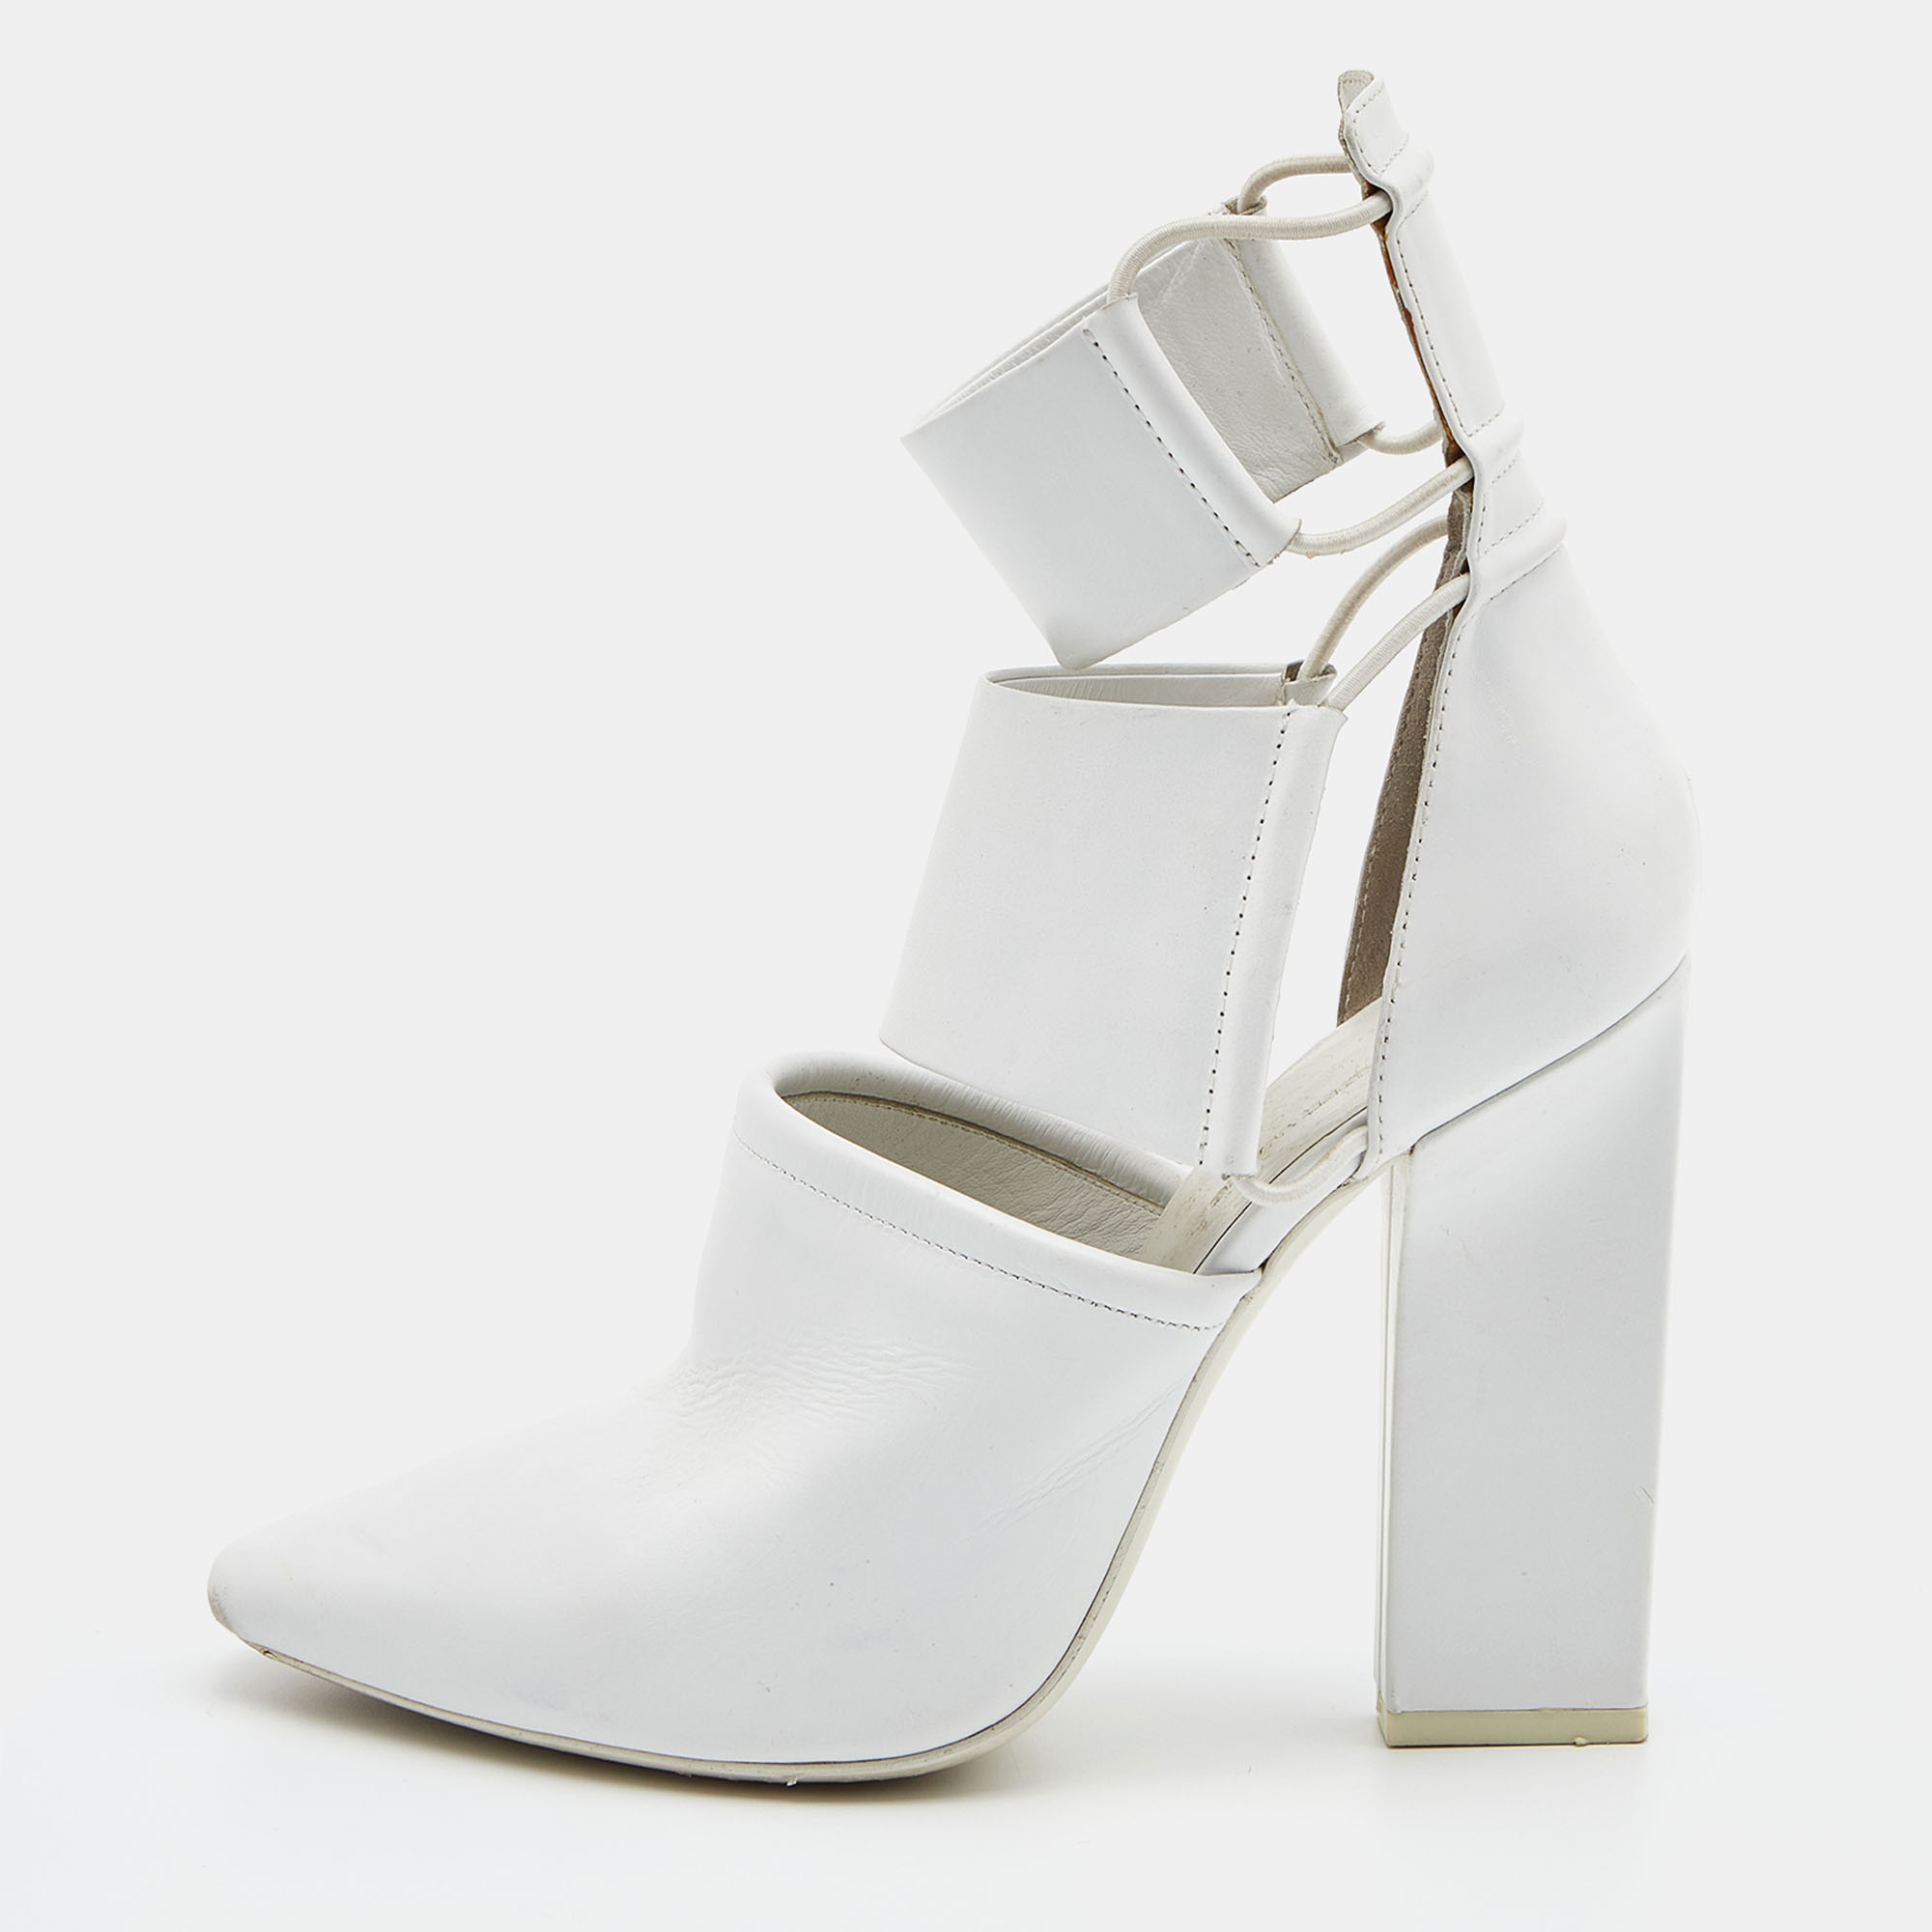 Alexander Wang White Leather Mackenzie Cut Out Booties Size 38